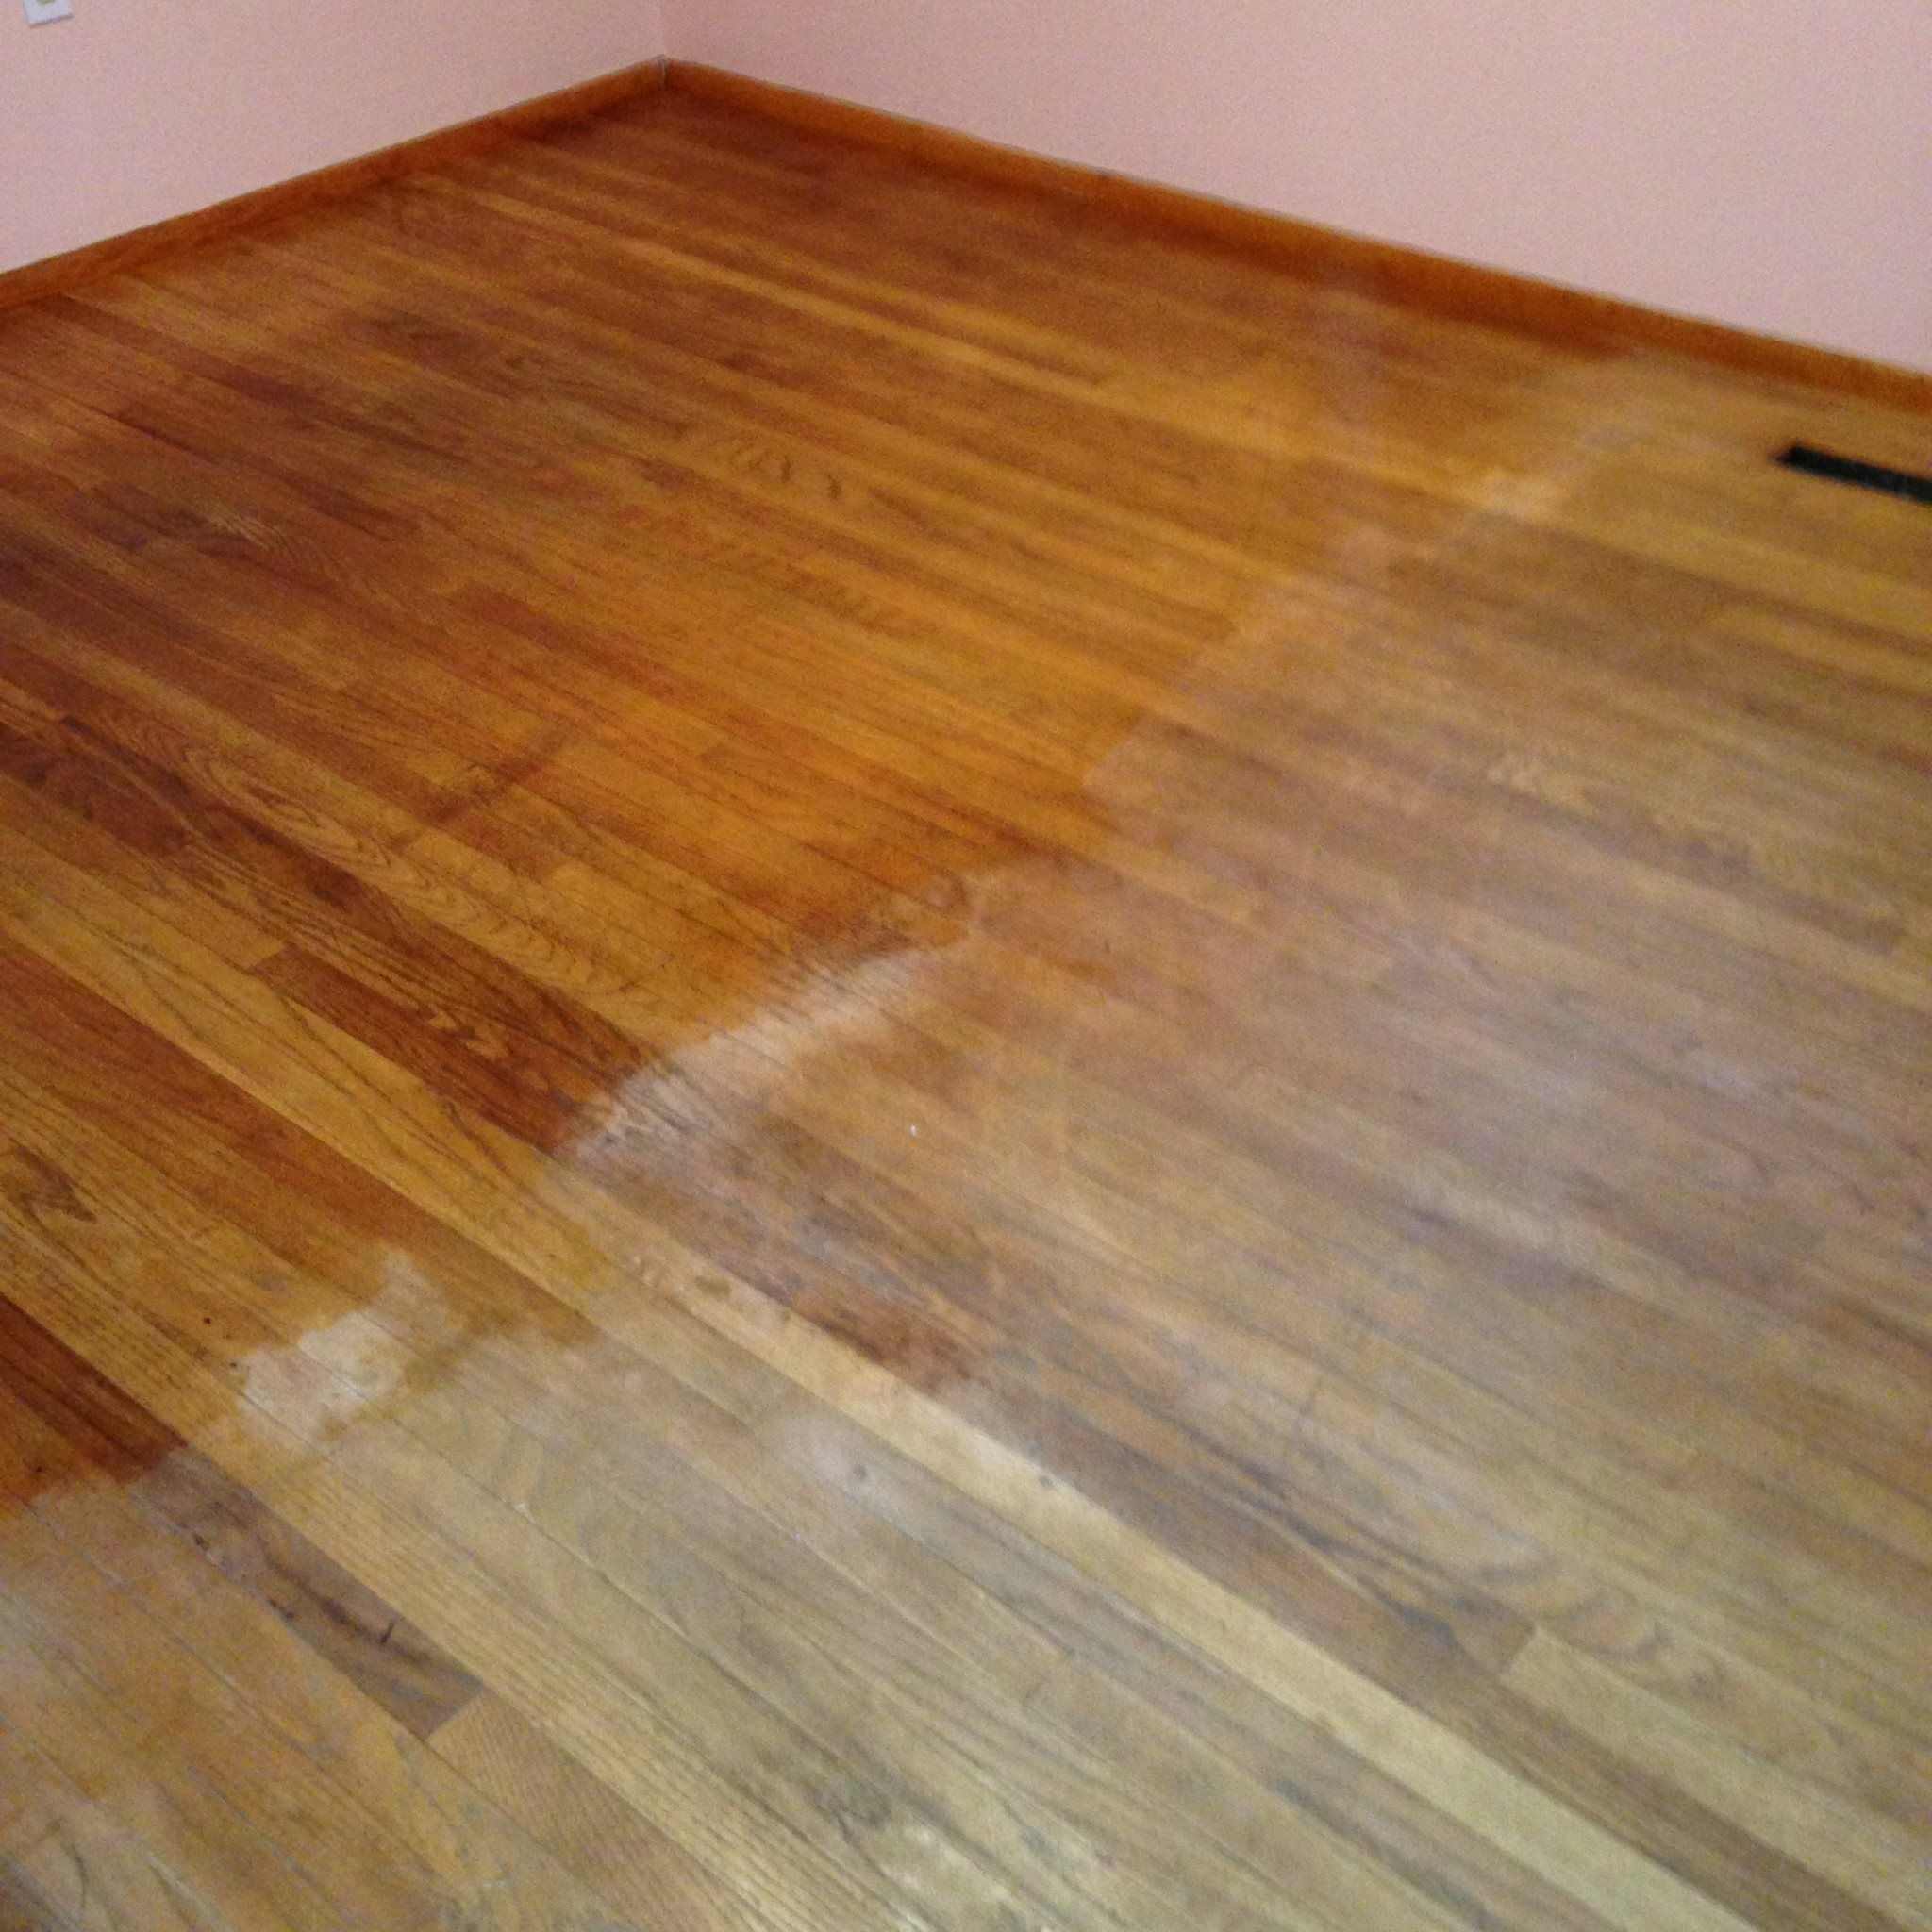 17 Elegant Hardwood Floor Cleaning Services Chicago 2024 free download hardwood floor cleaning services chicago of how to clean wood floors with vinegar floor intended for how to clean wood floors with vinegar 15 wood floor hacks every homeowner needs to know